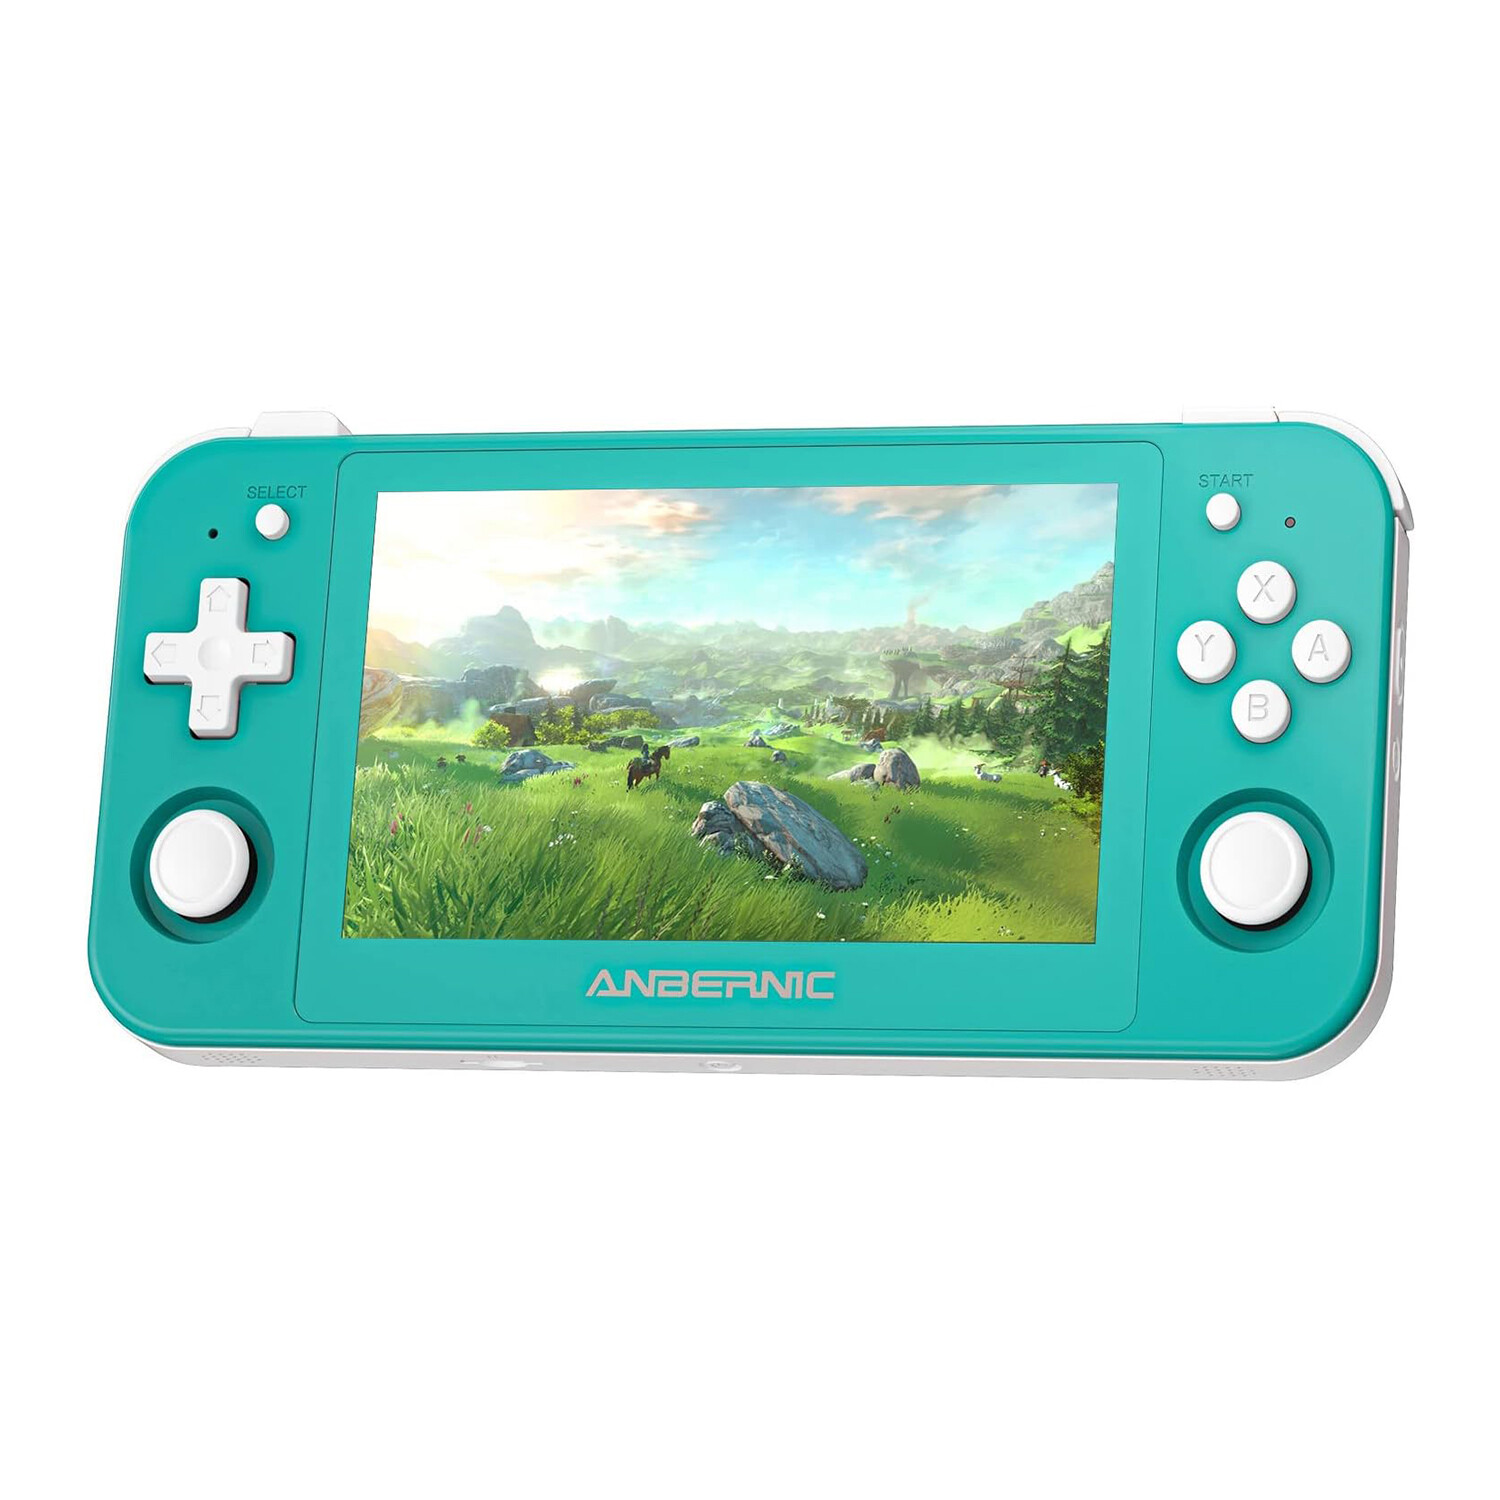 ANBERNIC RG505 Gaming Console // 16G (Turquoise) - Anbernic Retro ...